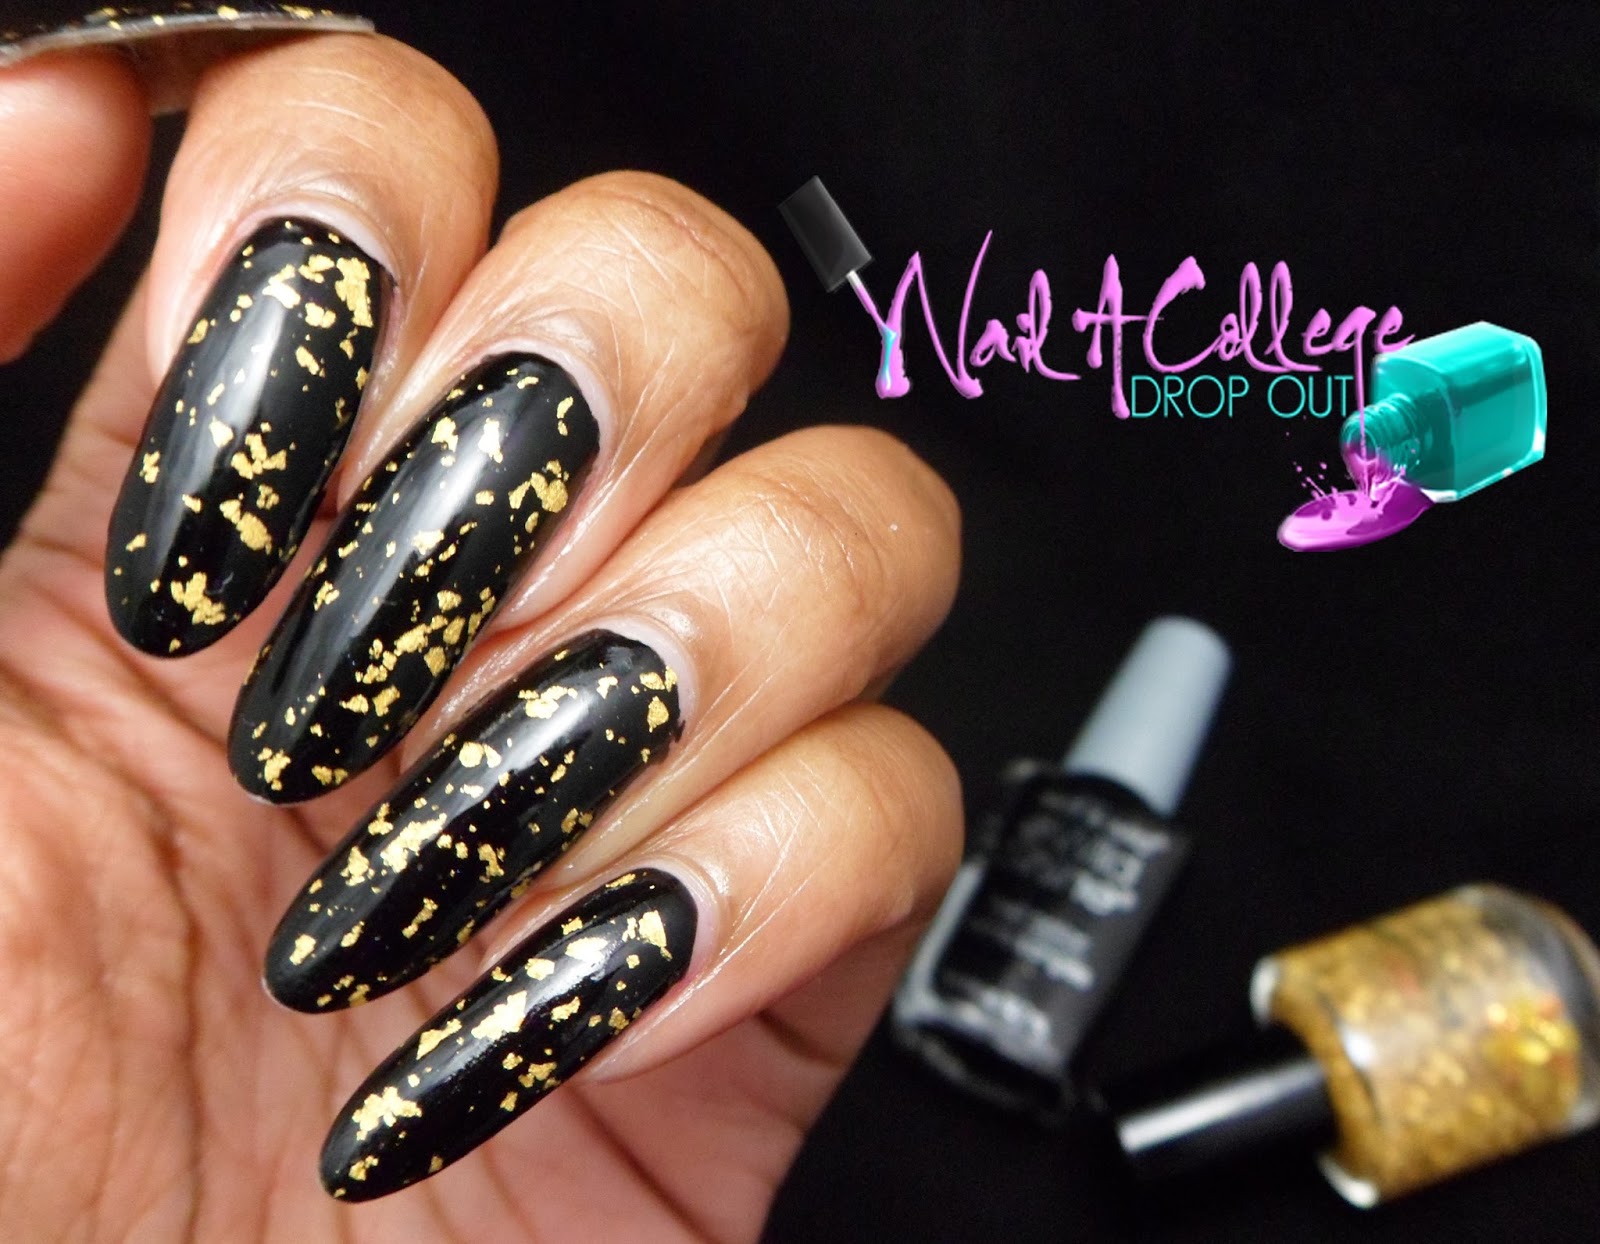 Nail A College Drop Out: Gold Leaf over Black